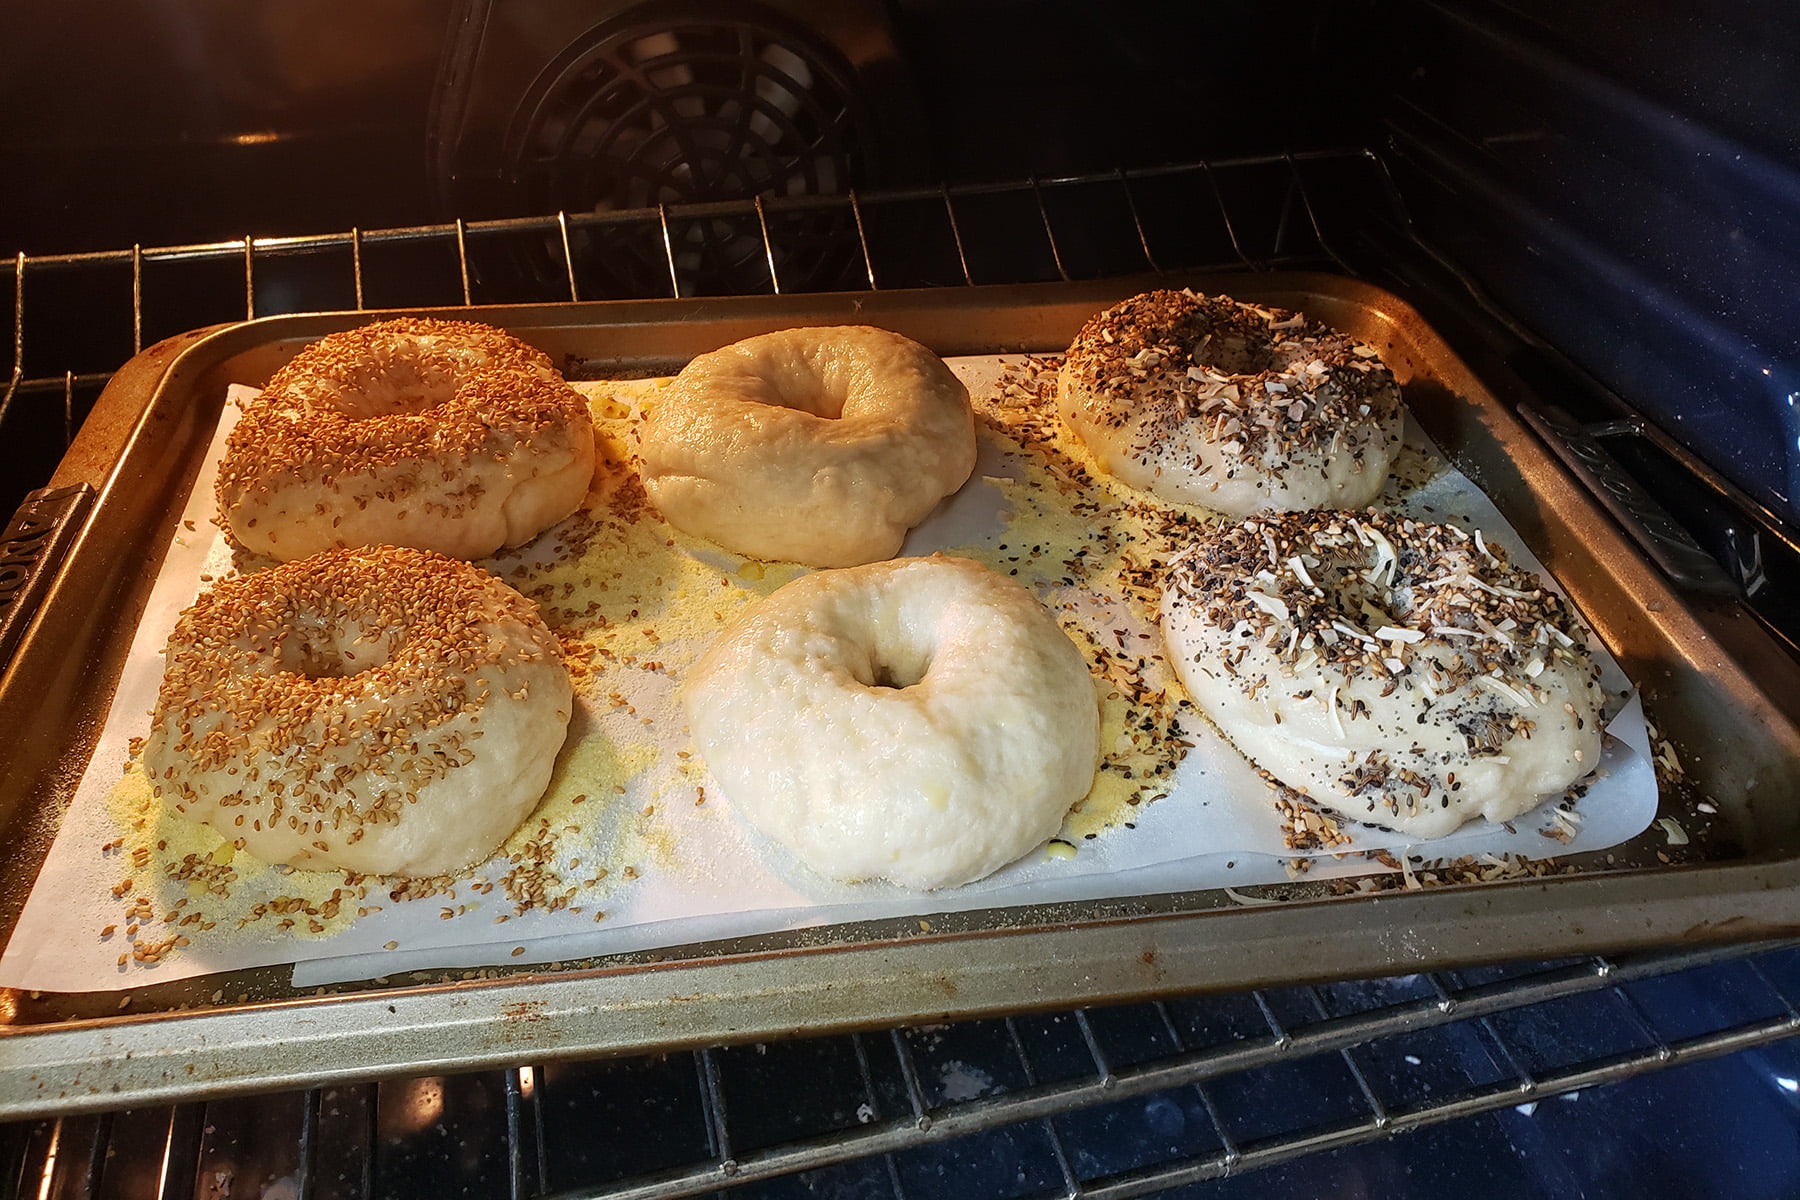 A pan of 6 bagels are in the oven. 2 are plain, two are coated in sesame seeds, and 2 are coated with "everything" seasoning.